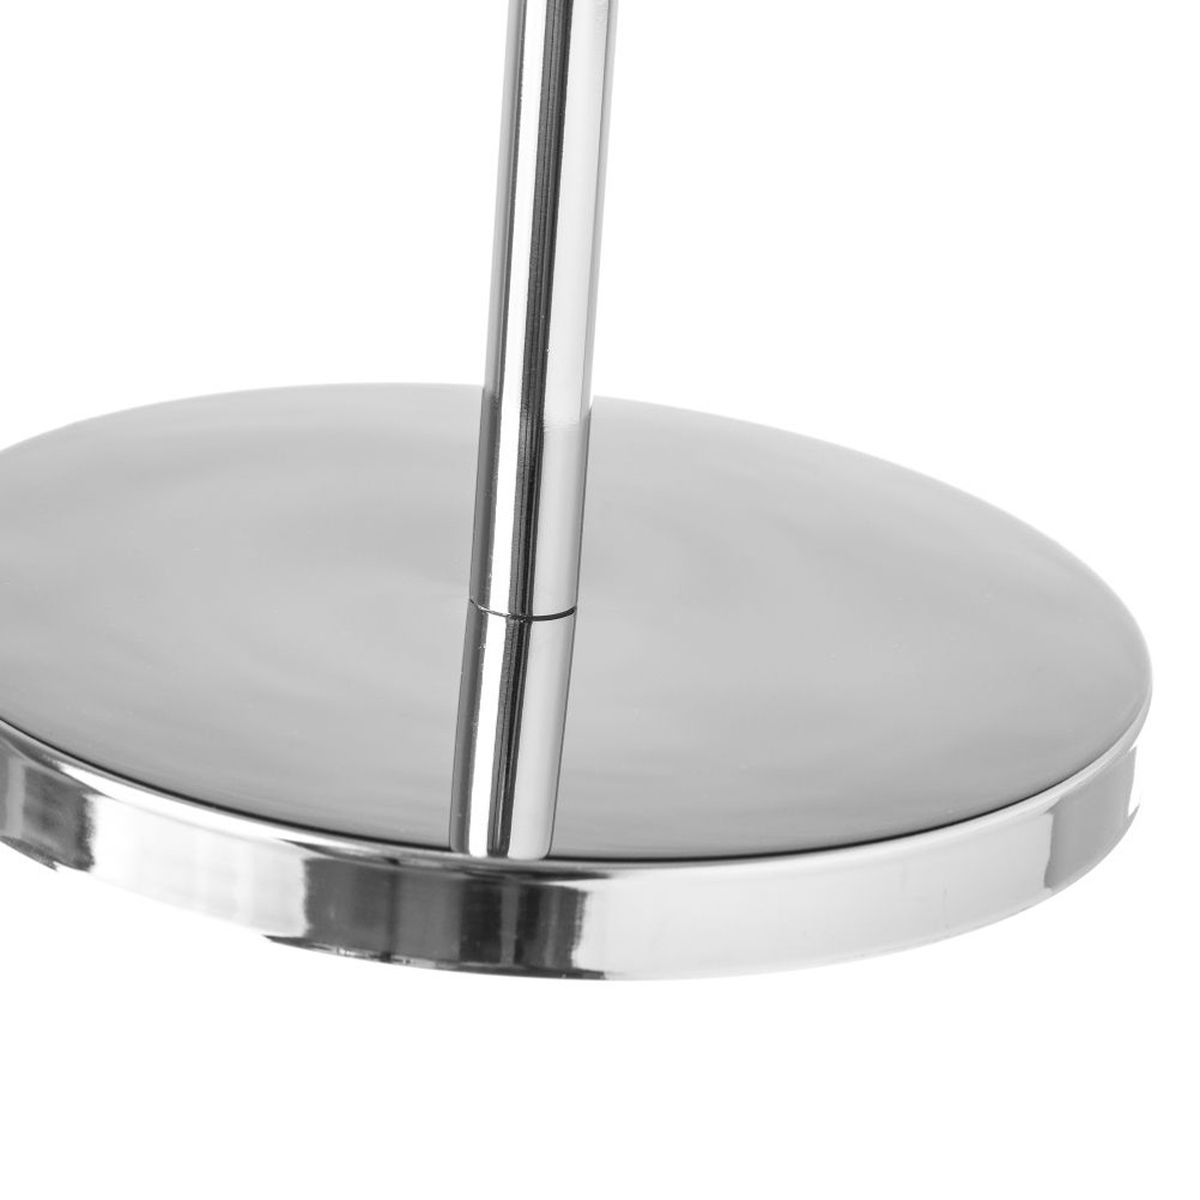 Double round mirror - Silver aspect - Free standing